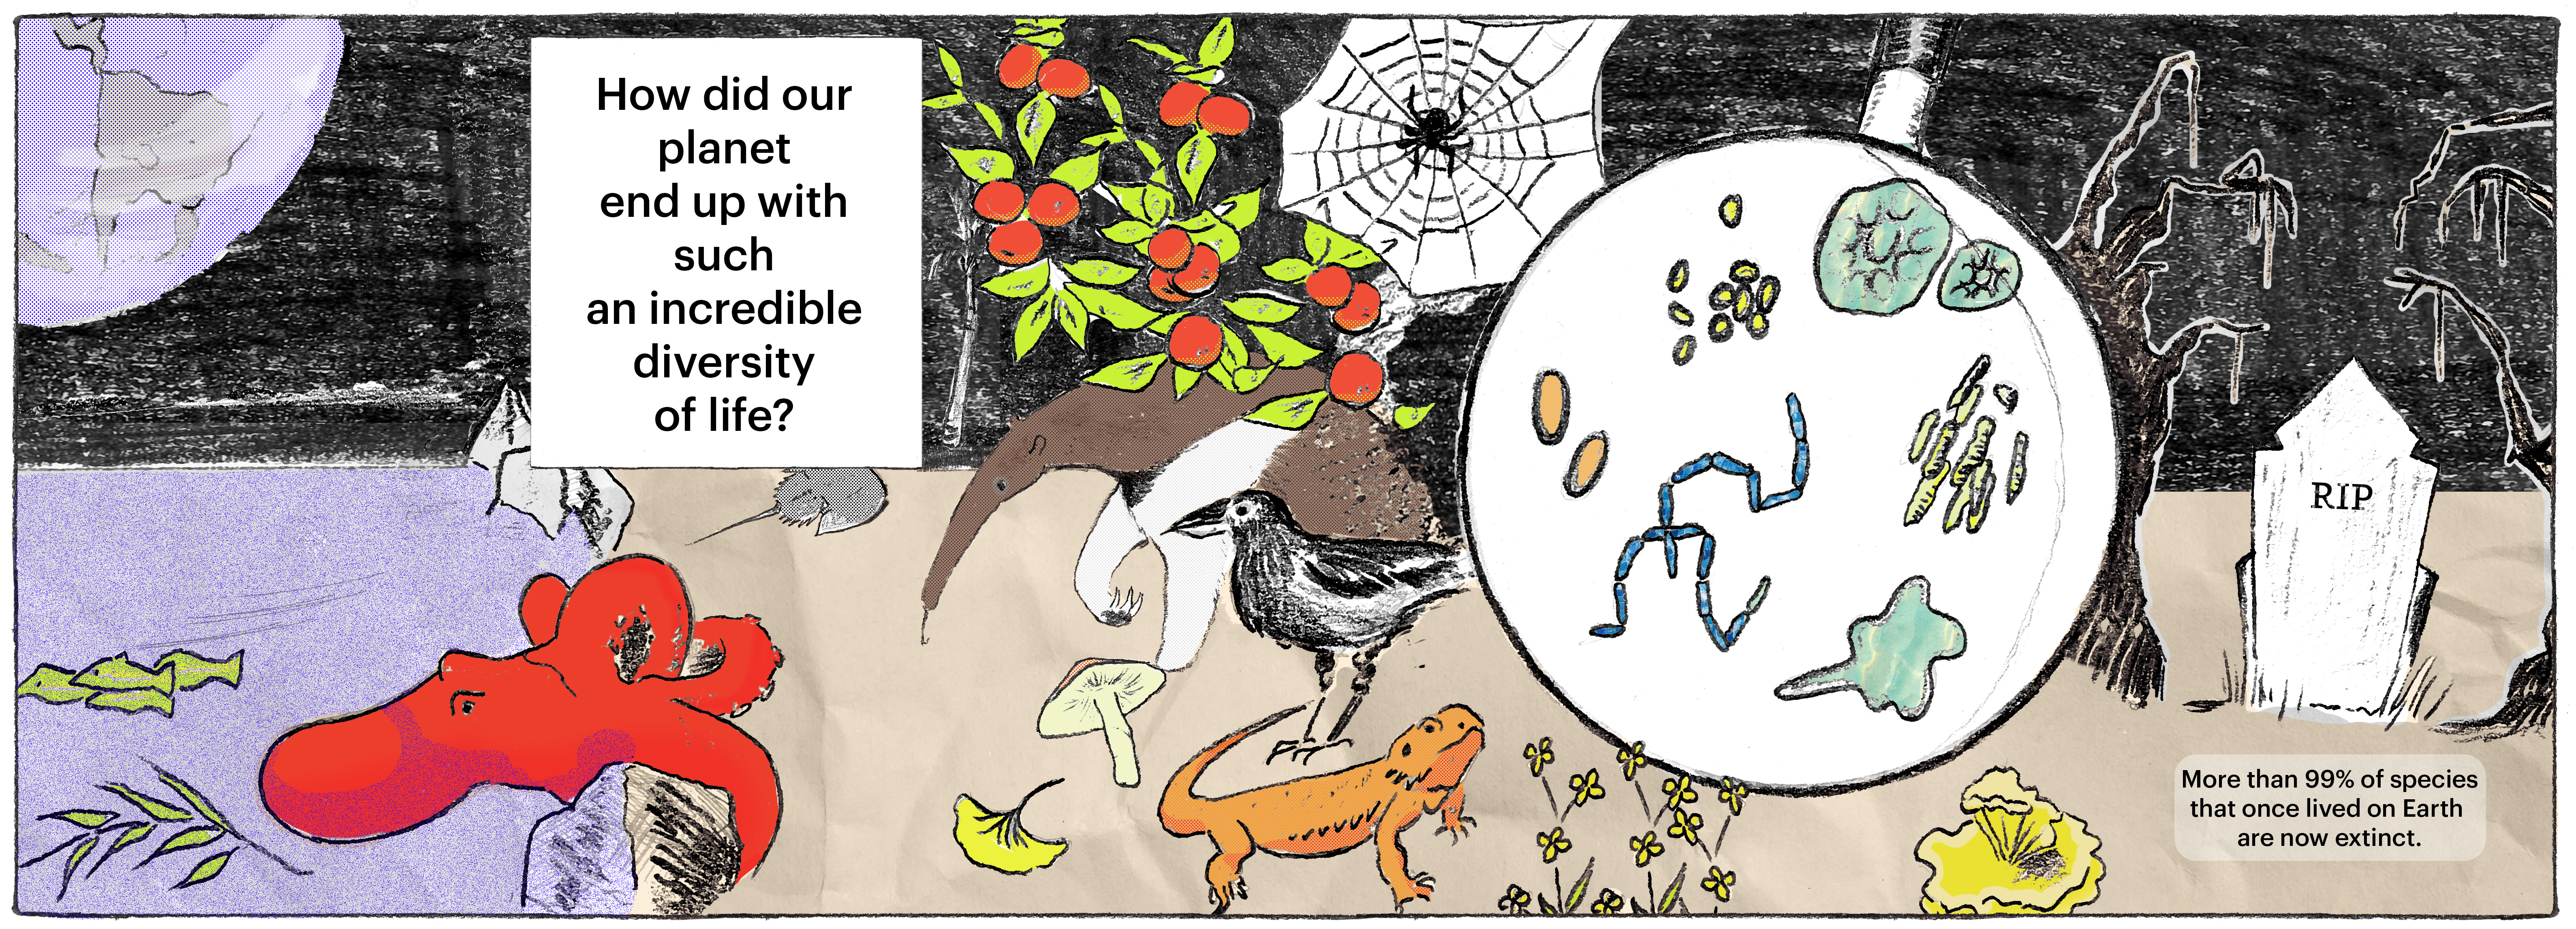 cartoon showcasing Earth's biodiversity. From left to right: fish, seaweed, octopus, horseshoe crab, ant eater, ginko leaf, mushroom, bird, bearded dragon, weeds, oranges, spider, magnifying glass held up to bacteria, gravestone